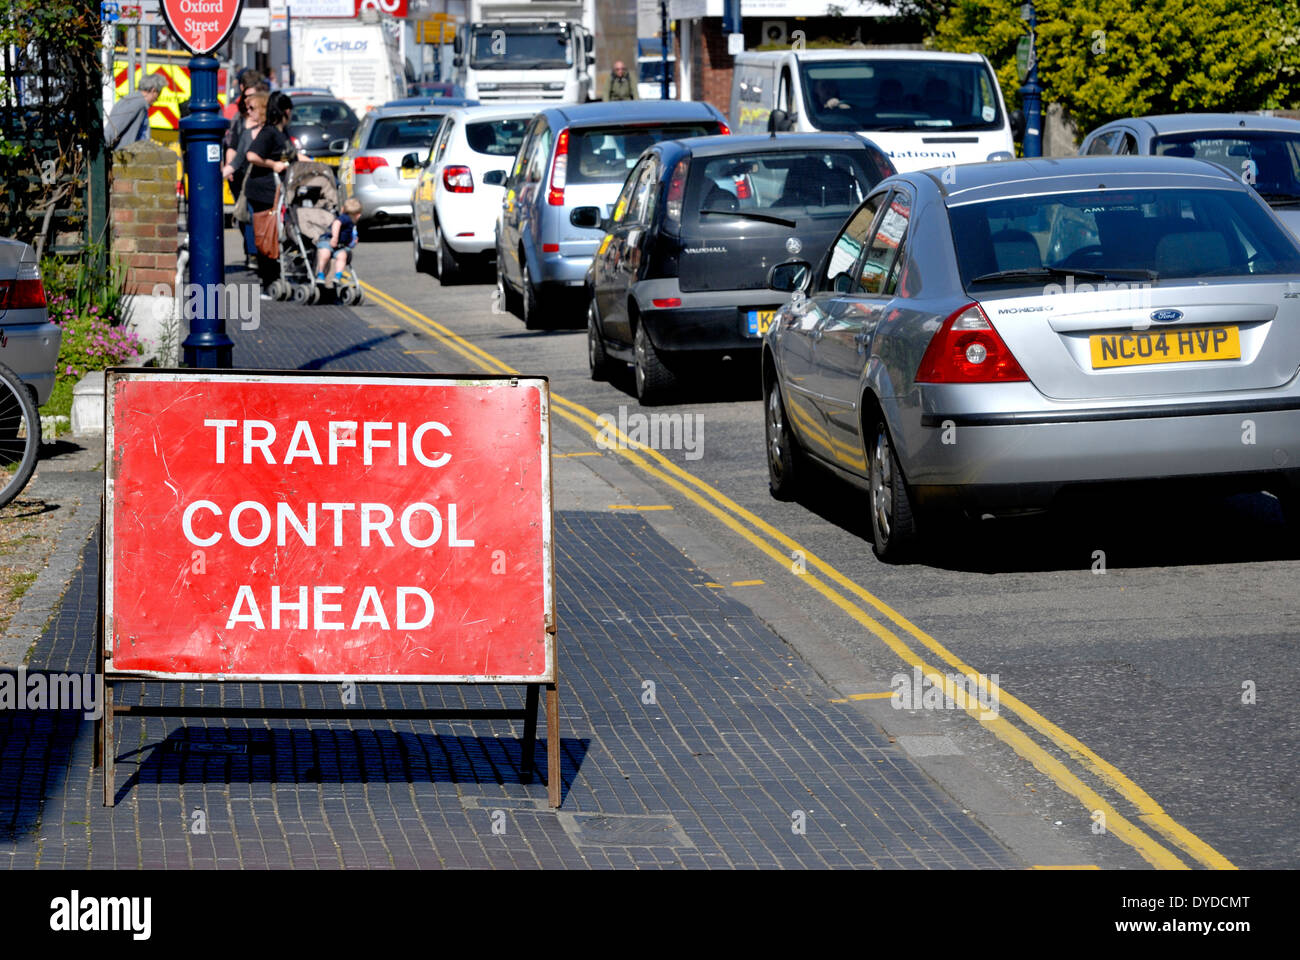 Whitstable, Kent, England, UK. Traffic Control Ahead sign on busy high street Stock Photo